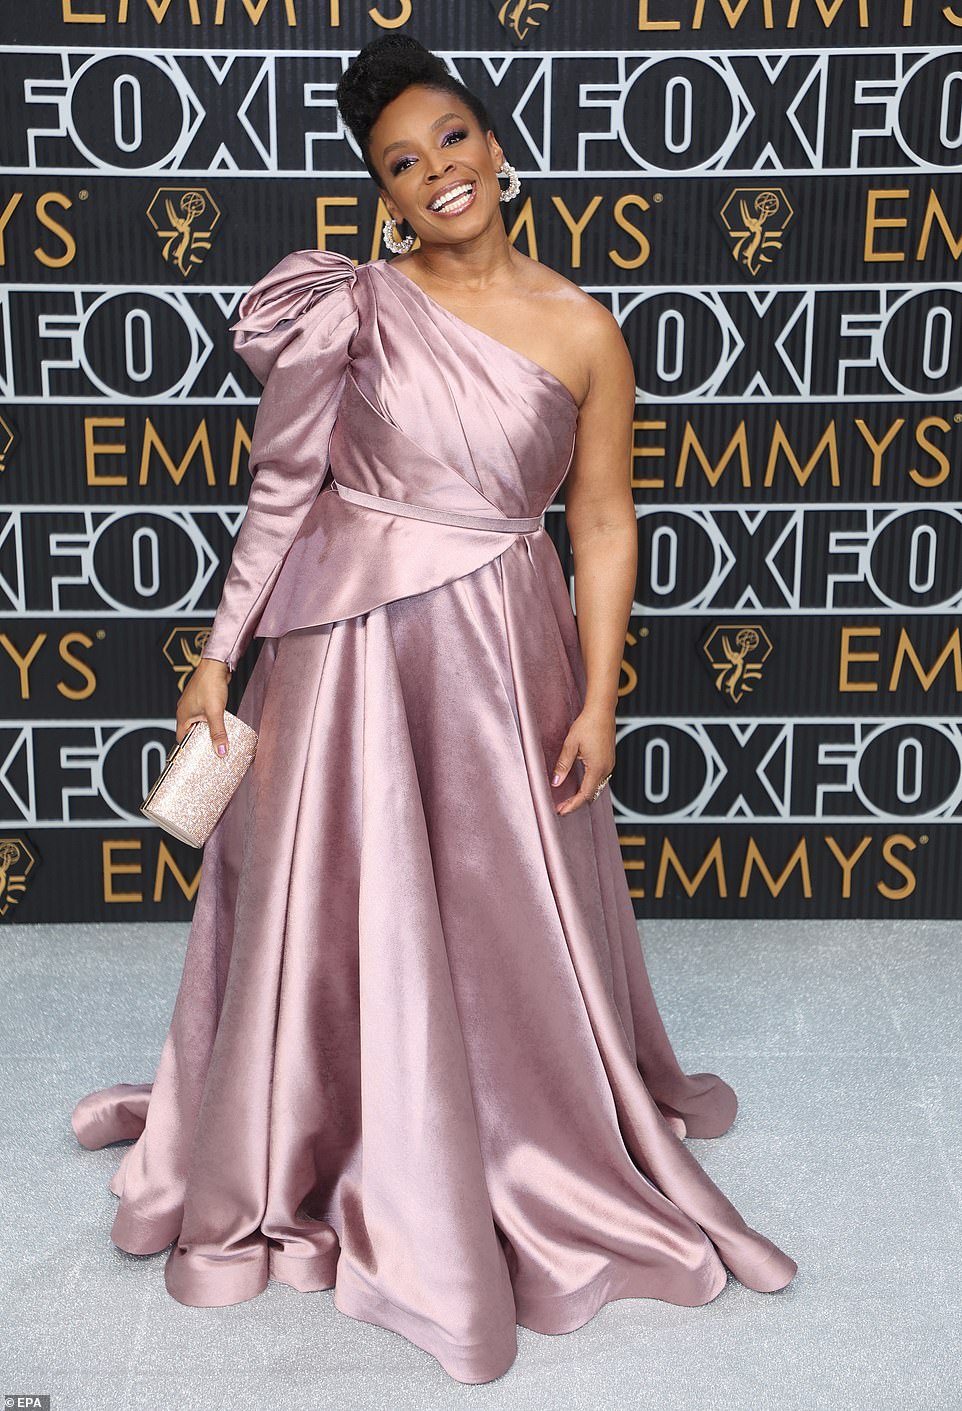 Comedian Amber Ruffin's pale pink gown featured far too much fabric and did little to flatter her figure, while the color made it look like something off the sale rack at David's Bridal